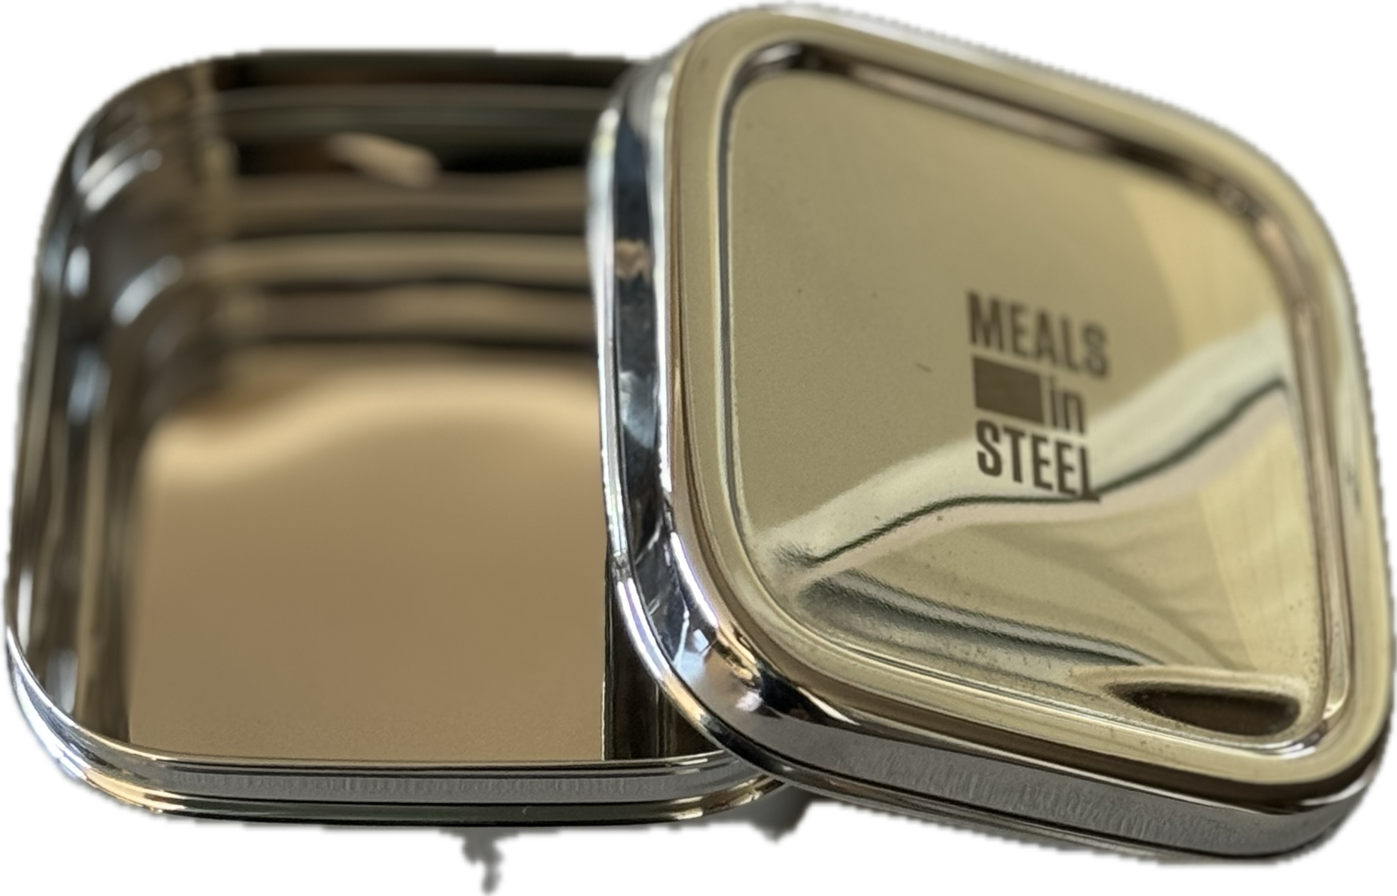 Large Leakproof Lunch box - Deal - Meals In Steel